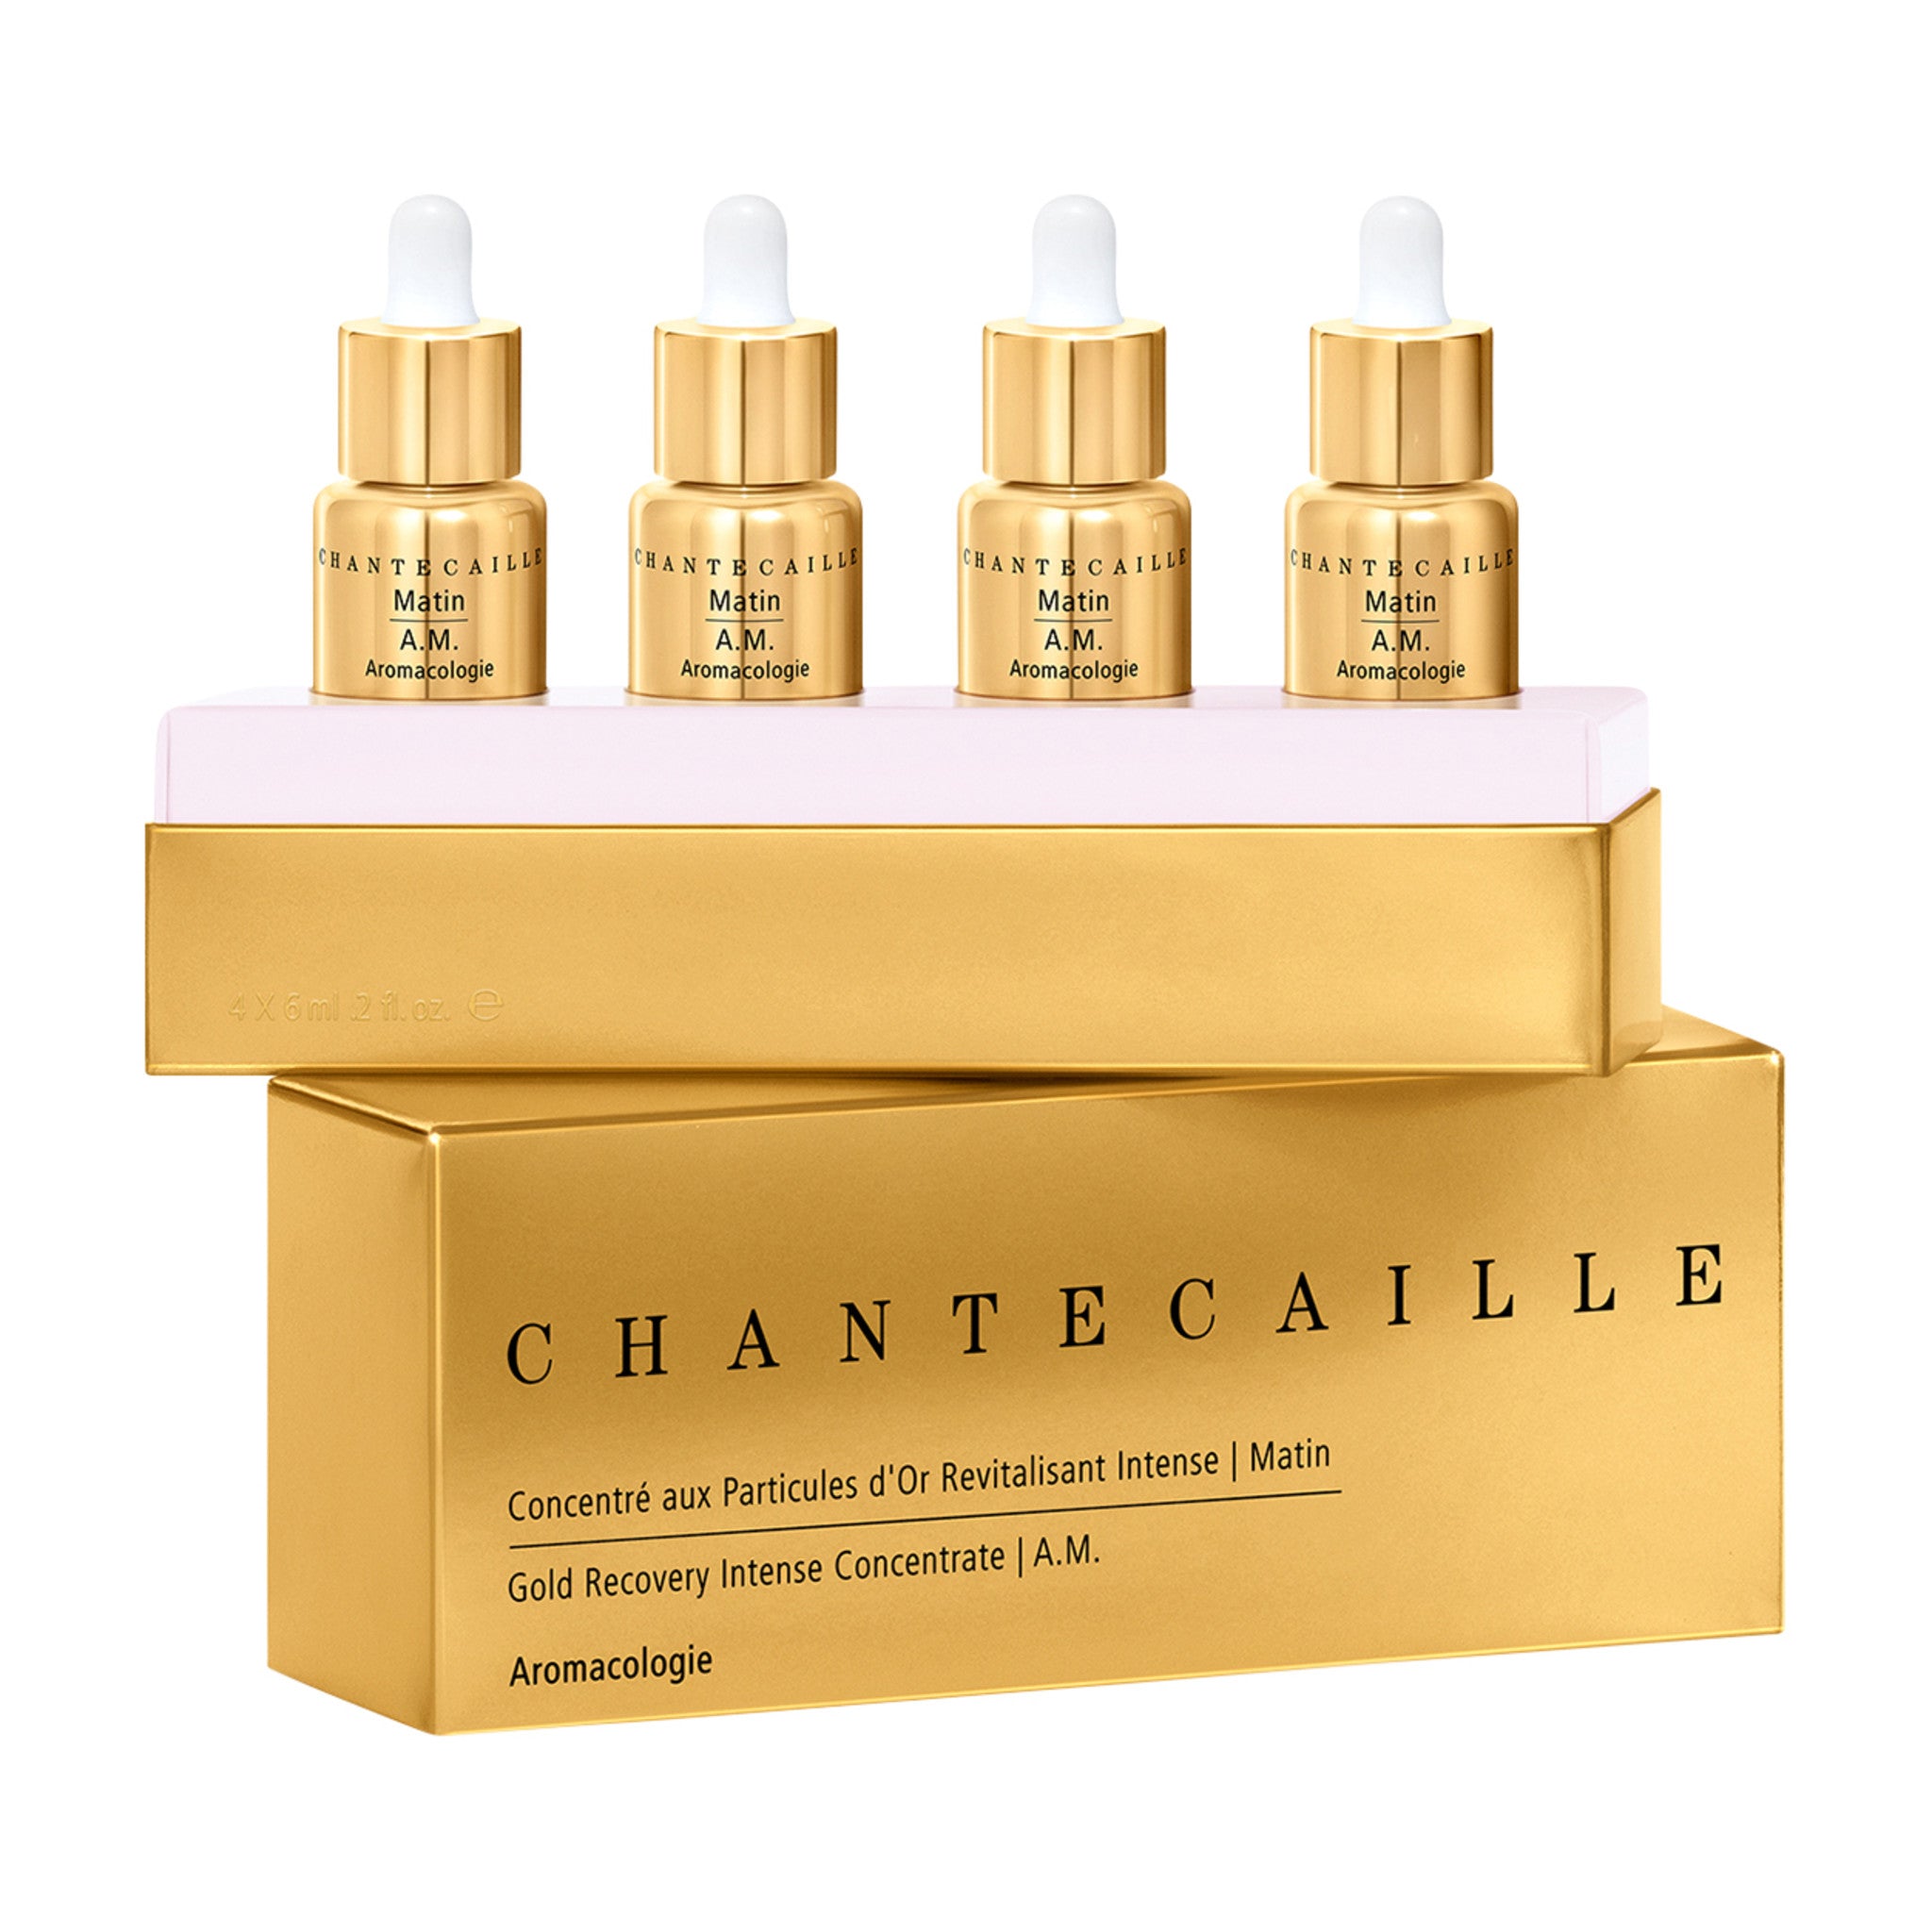 Chantecaille Gold Recovery Intense Concentrate A.M. main image.